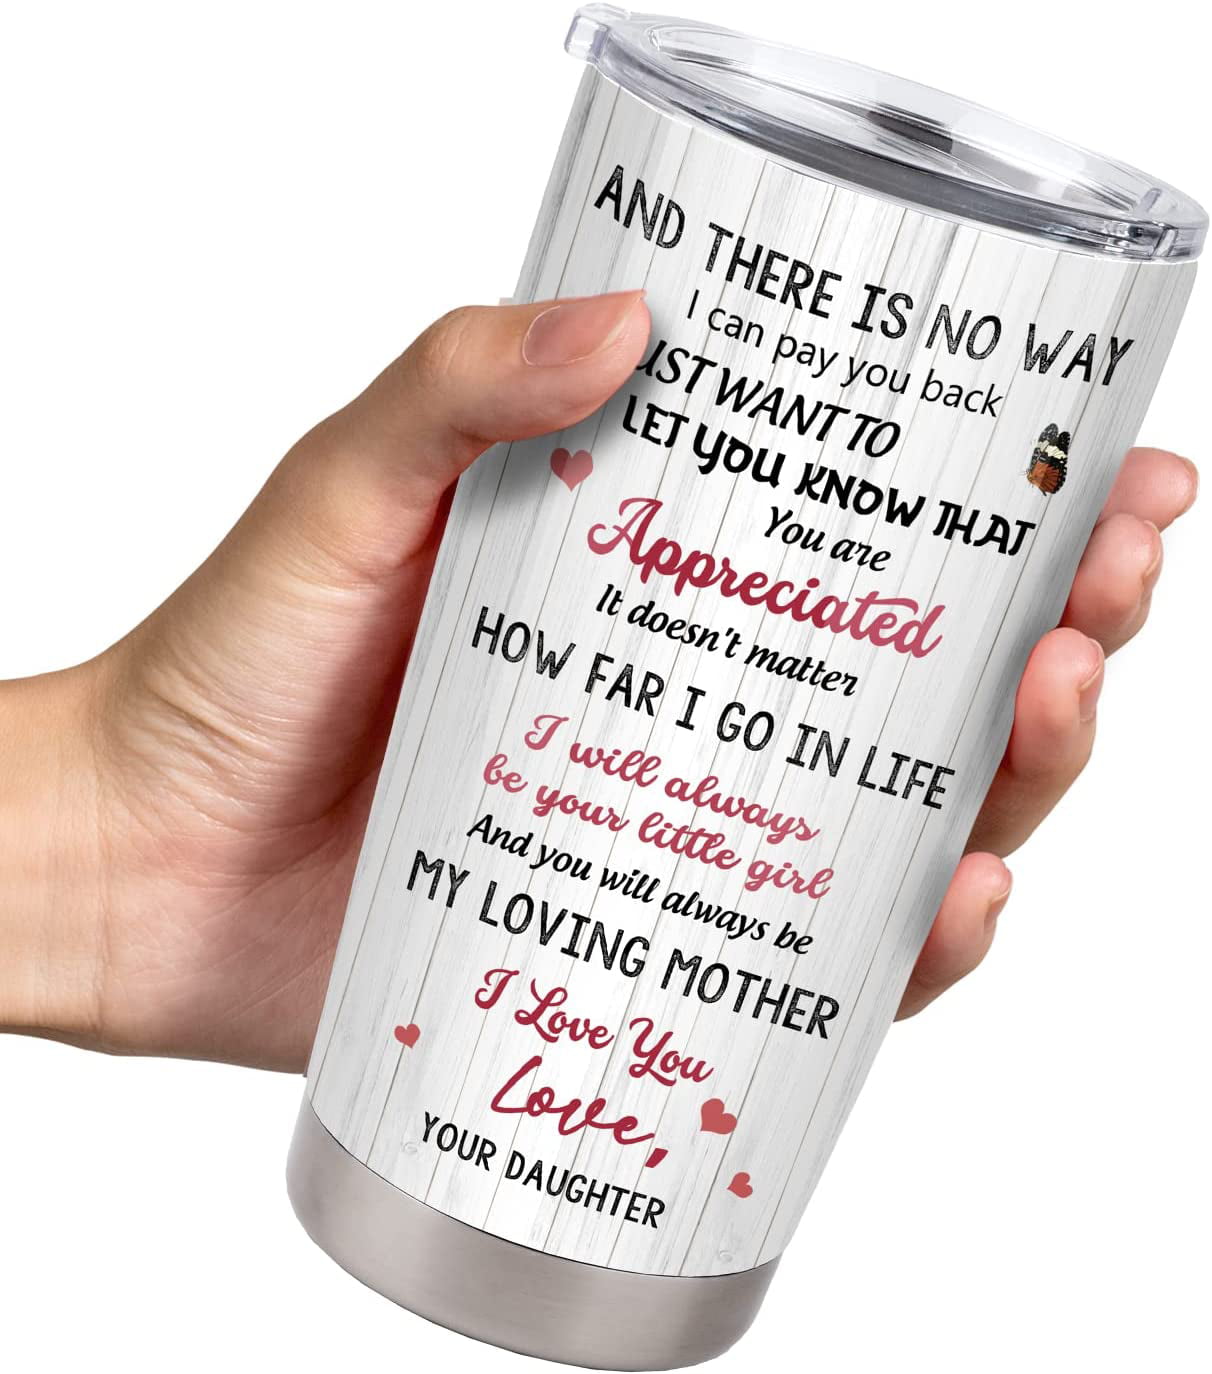 Like Mother Like Daughter Chibi - Personalized Tumbler Cup - Birthday  Mother's Day For Mom Funny Gift For Daughter - Gift From Daughter, Husband,  Mom